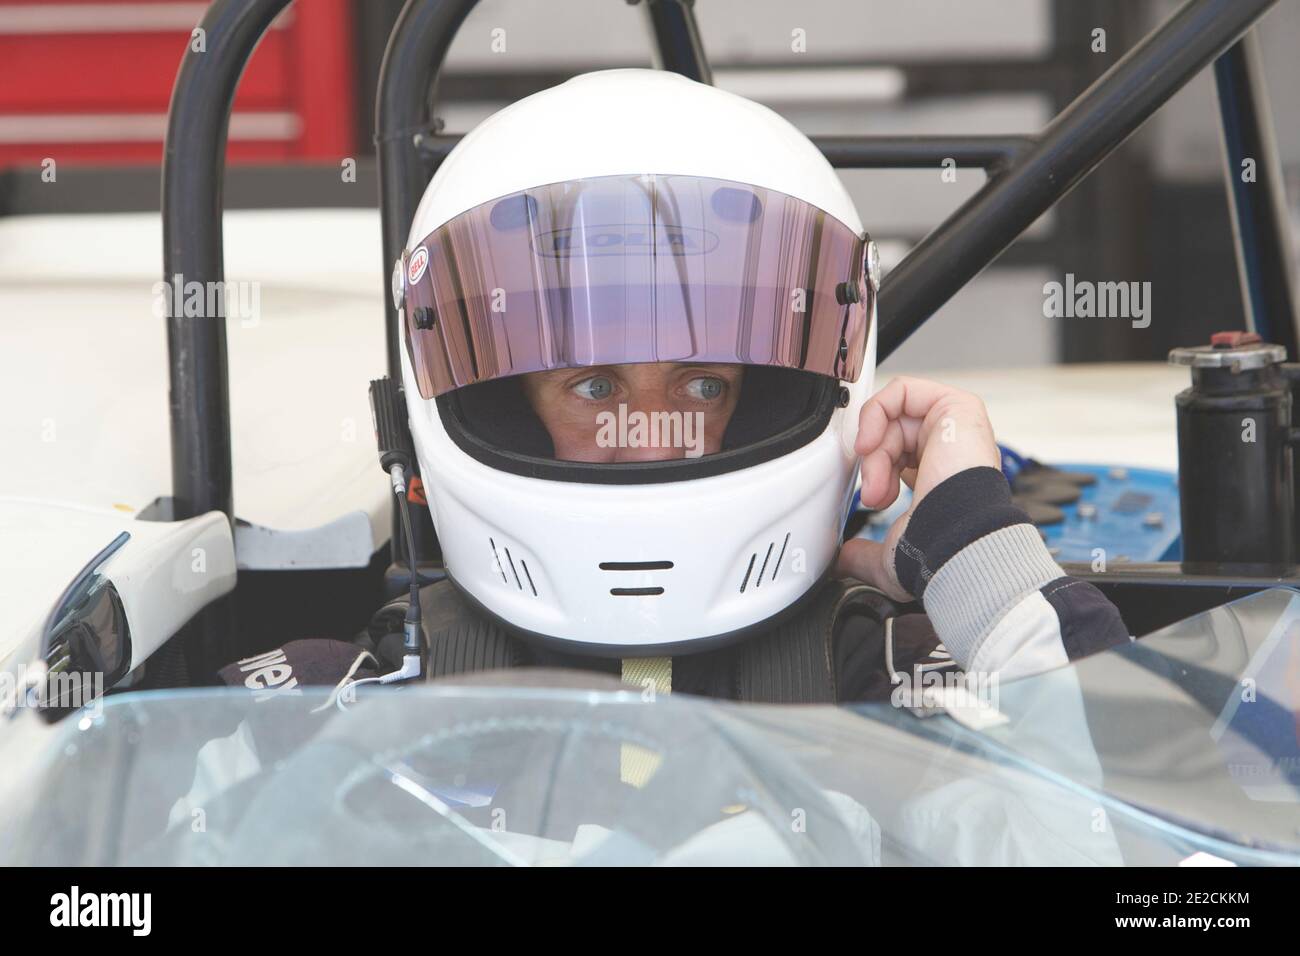 Scottish drummer Neil Primrose of Travis band, takes part in a motor racing on the Paul Ricard circuit in Le Castellet, Southern France on October 8, 2011. Primrose driving a Lola car. Photo by Patrice Coppee/ABACAPRESS.COM Stock Photo